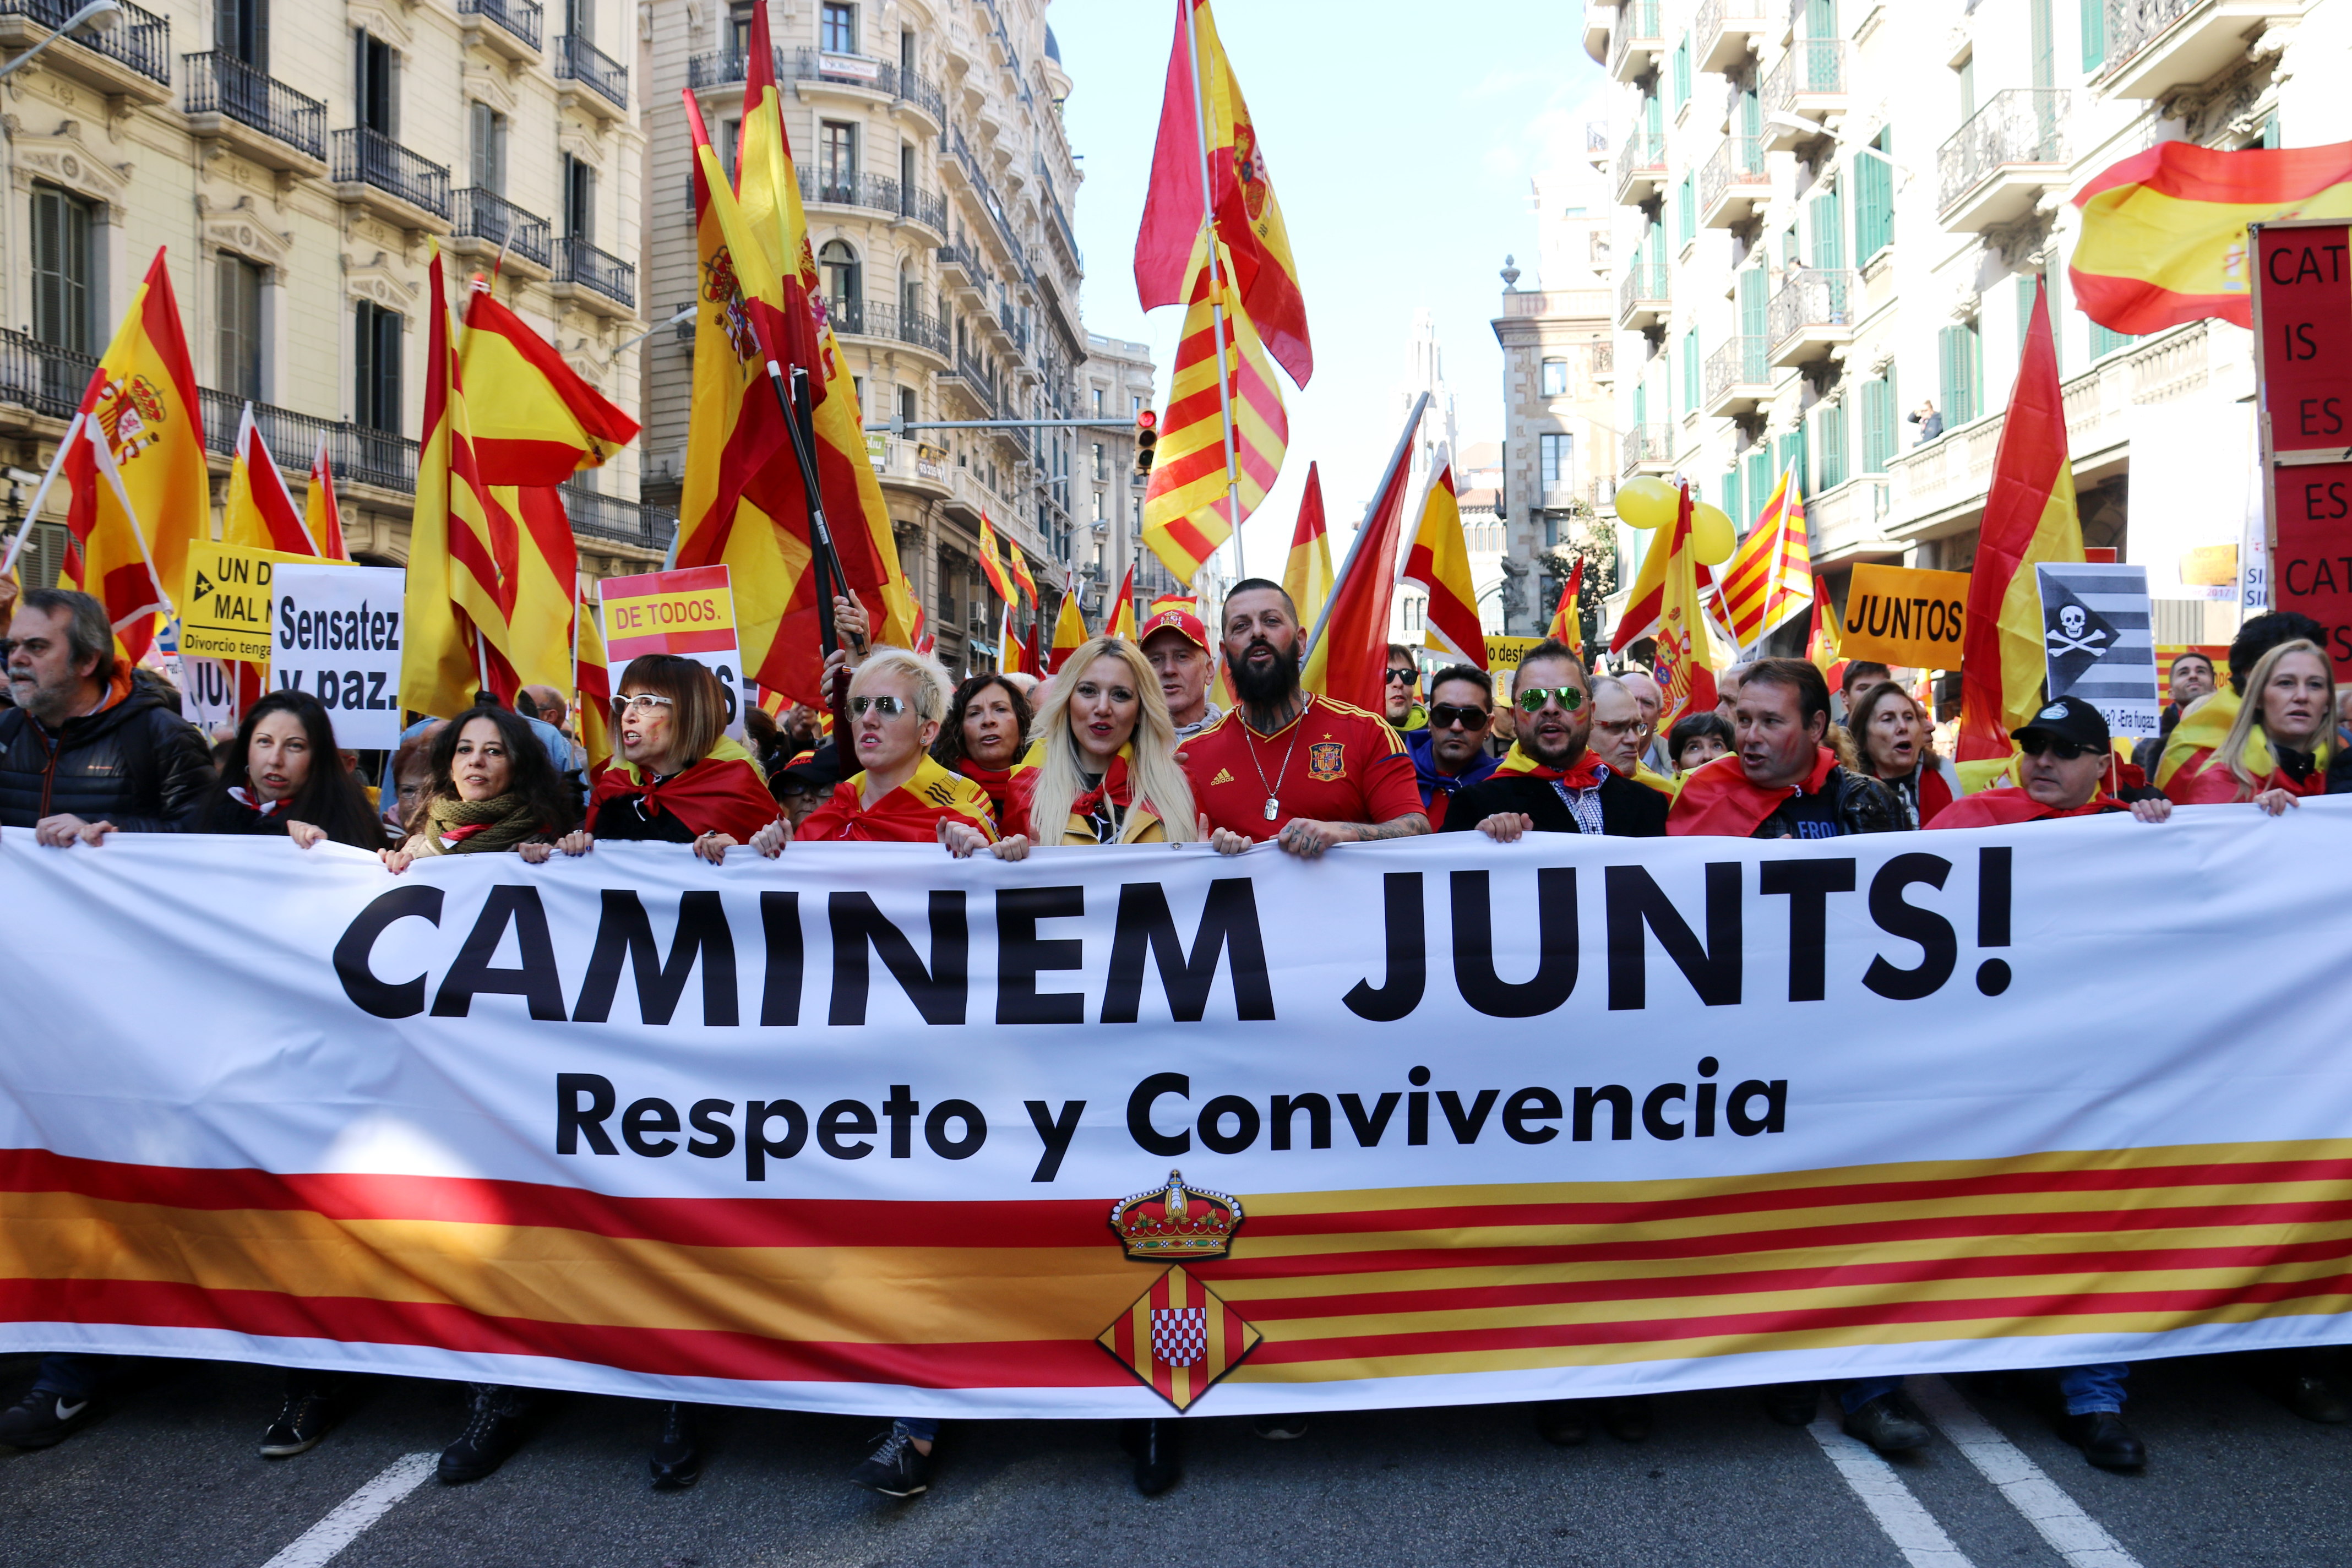 Unionist protesters in Barcelona on Spain's Constitution Day (by ACN)